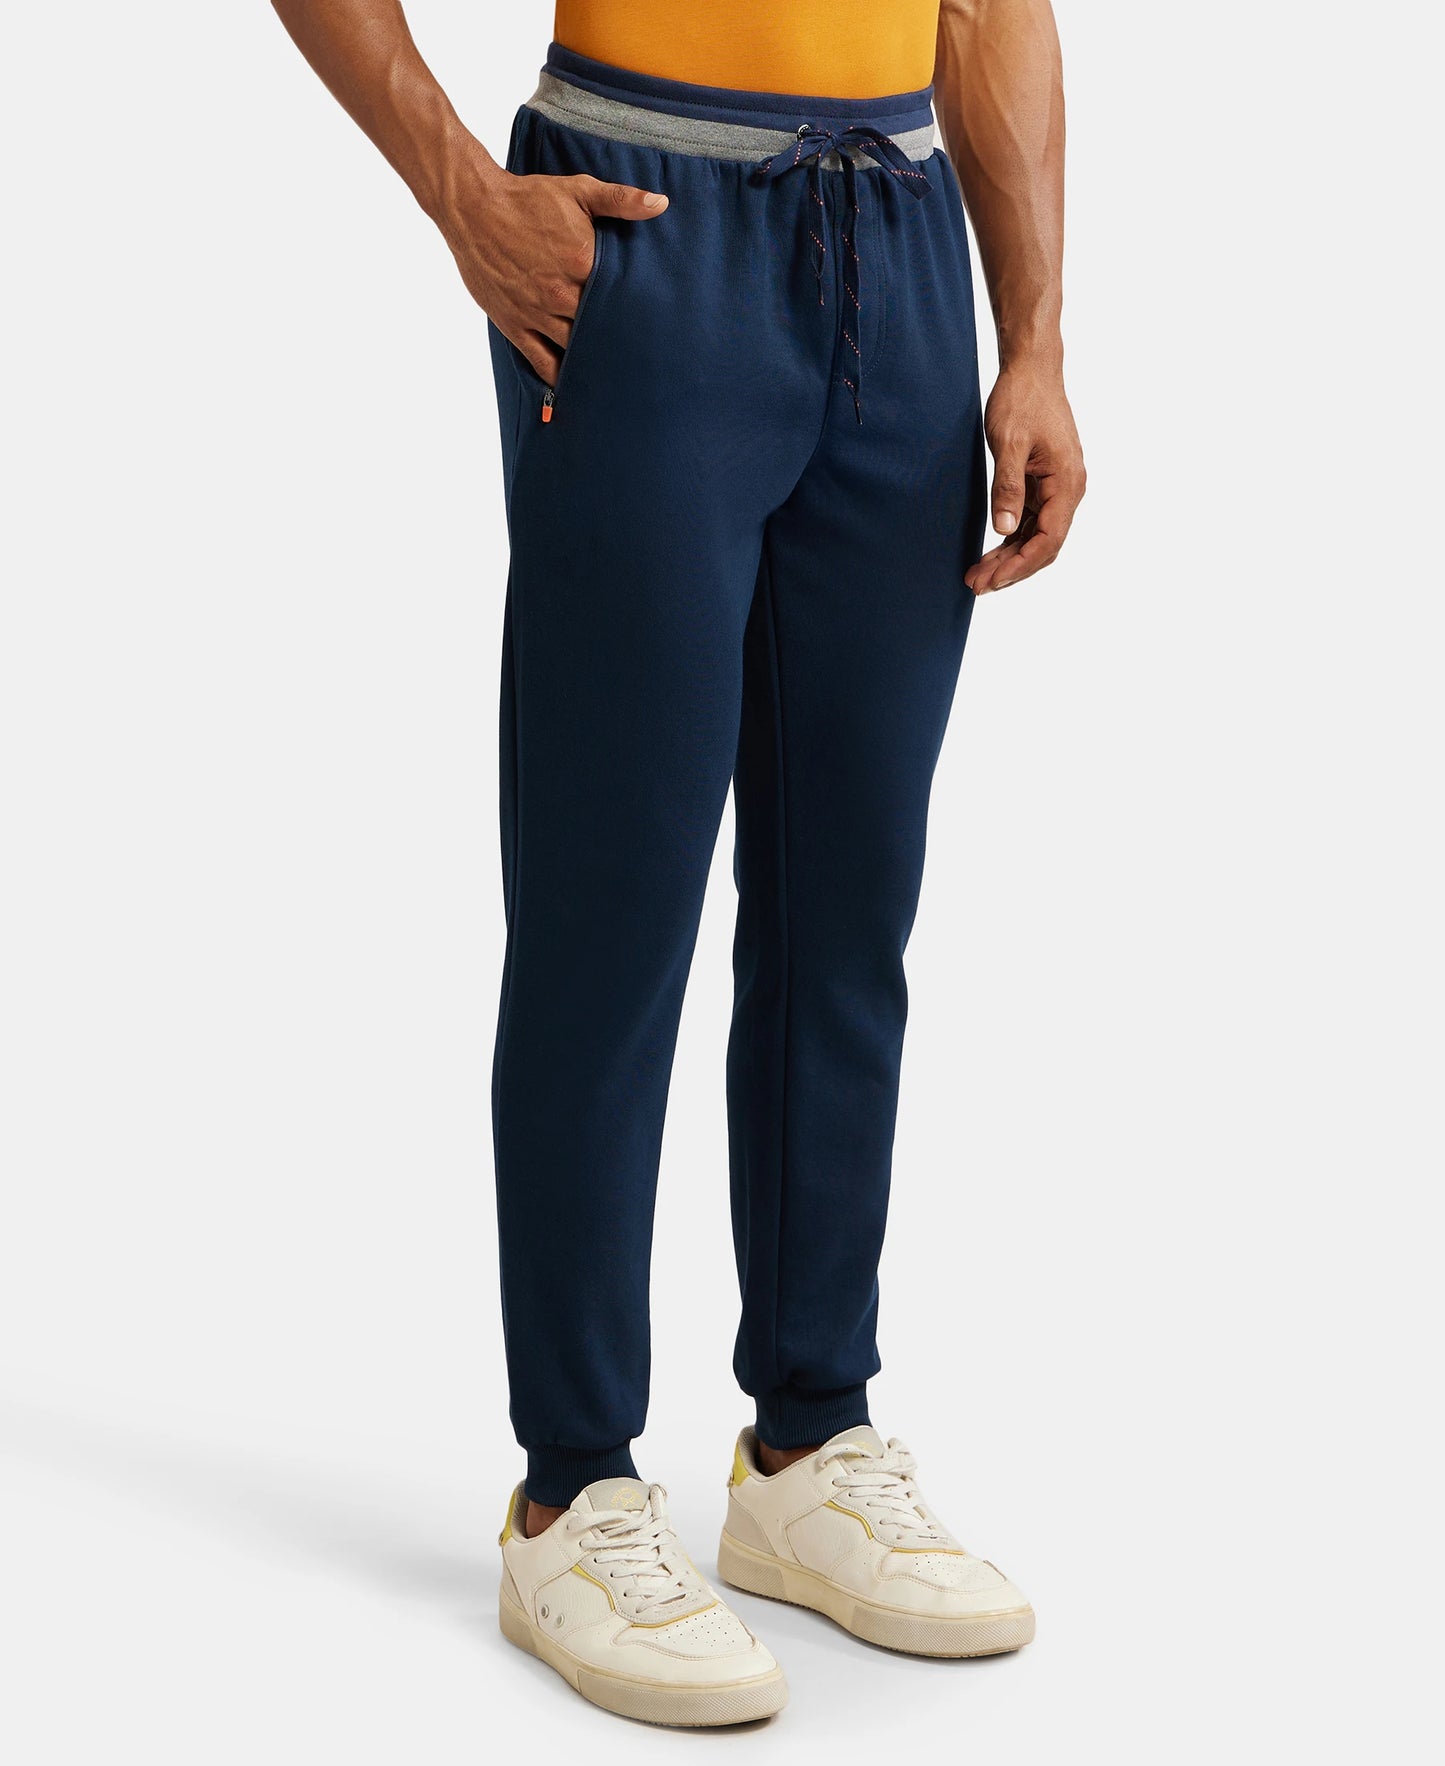 Super Combed Cotton Rich Pique Slim Fit Jogger with Zipper Pockets - Navy-2